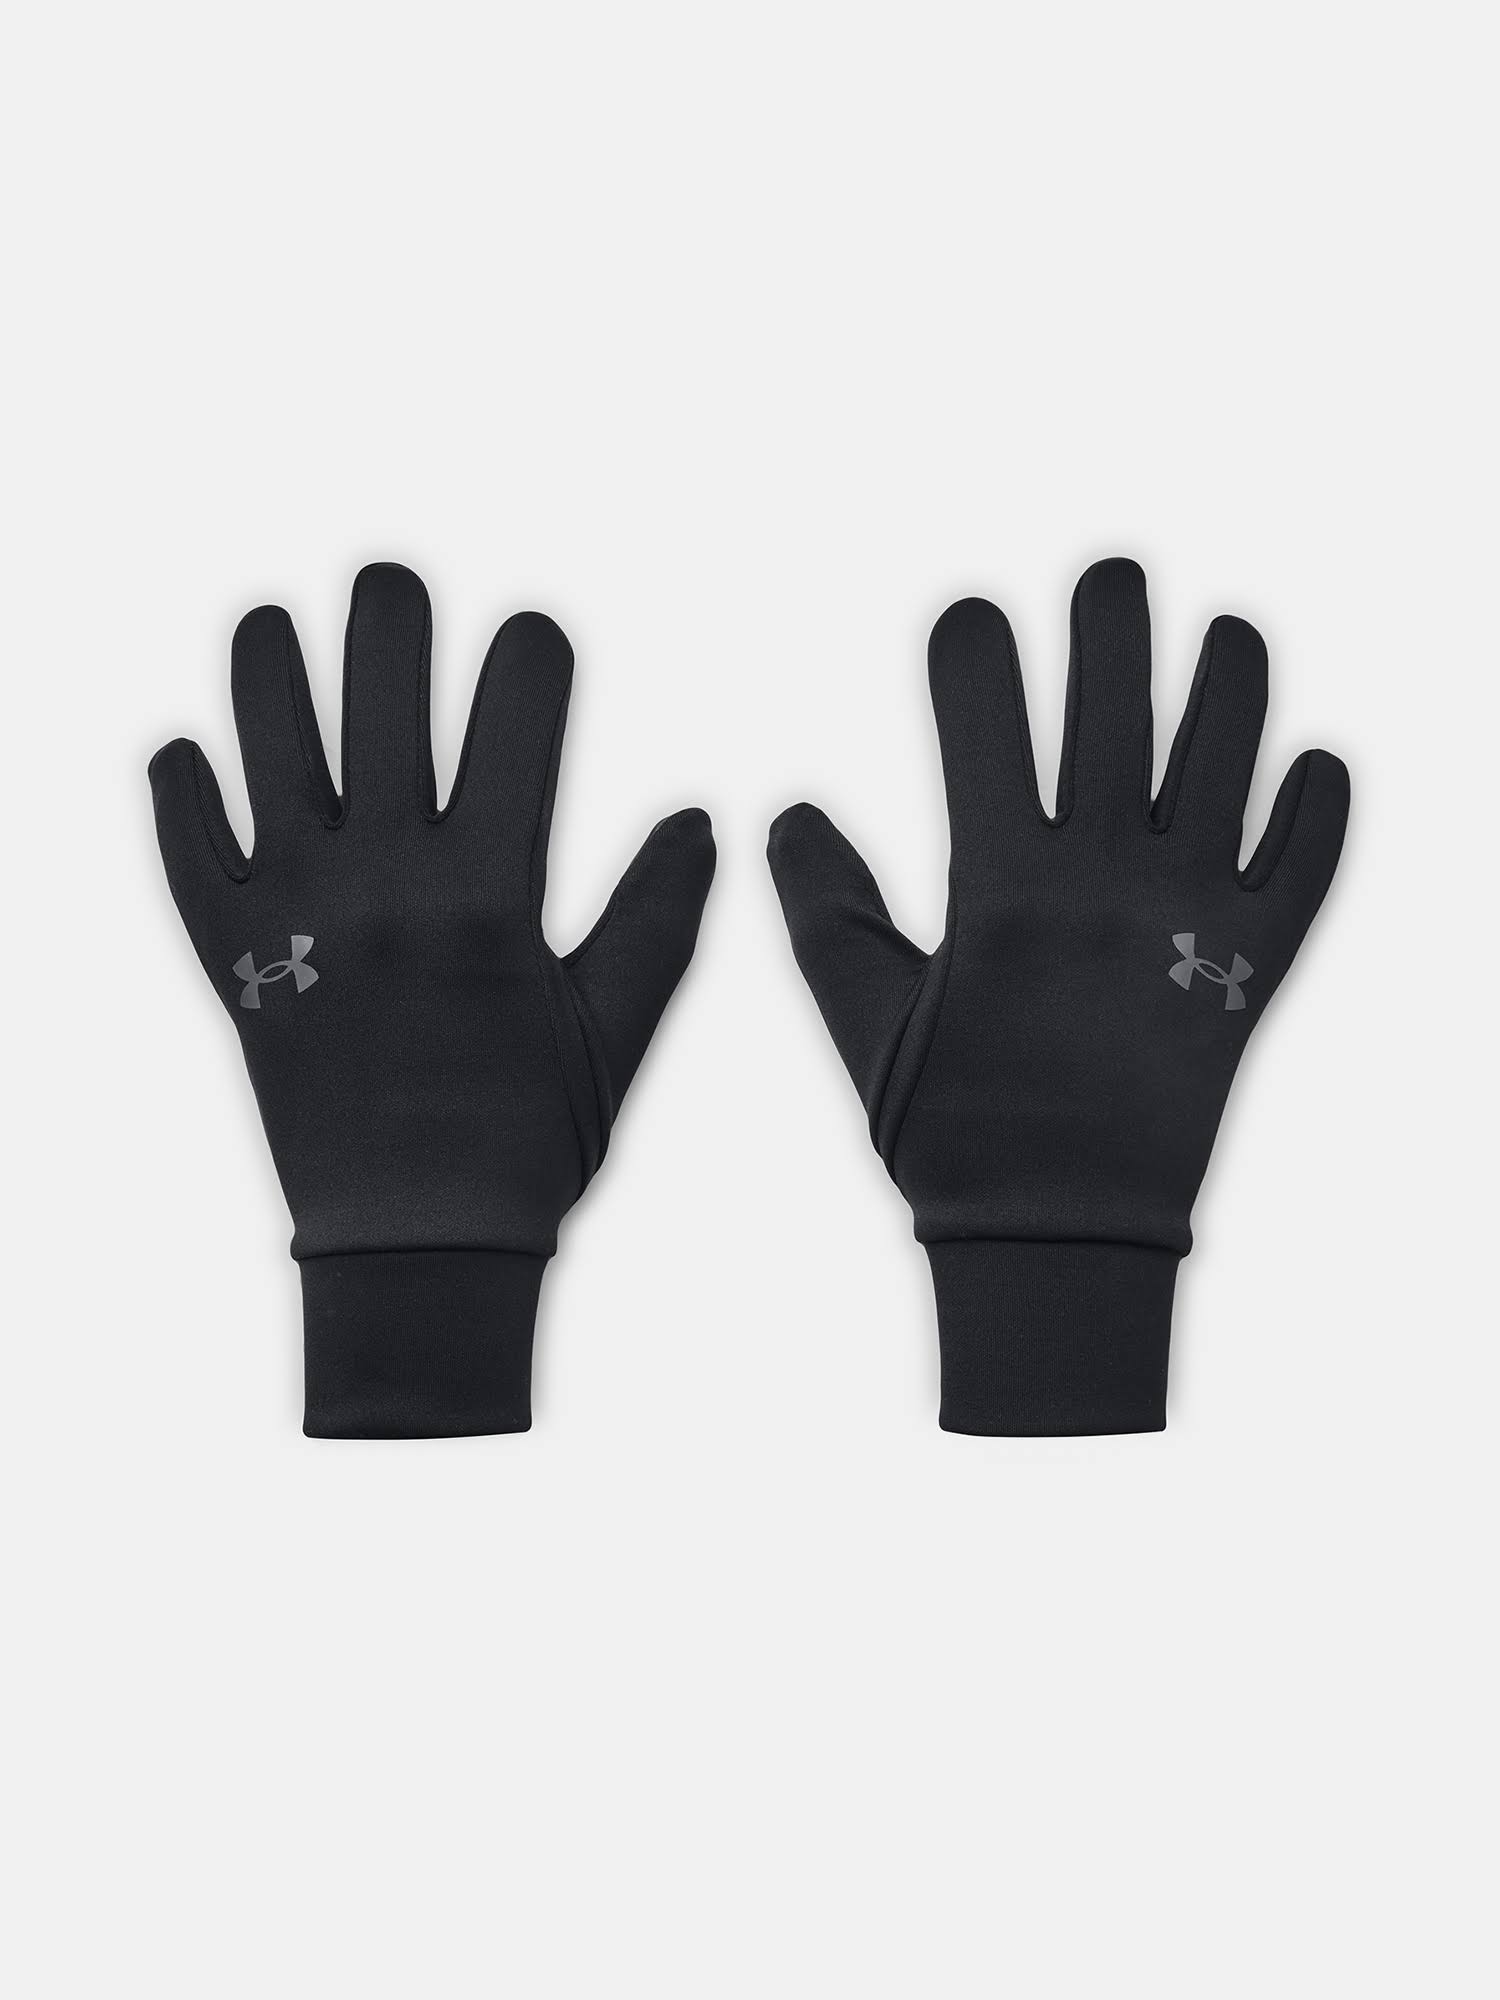 Boys' Under Armour Storm Liner Gloves, Small, Black